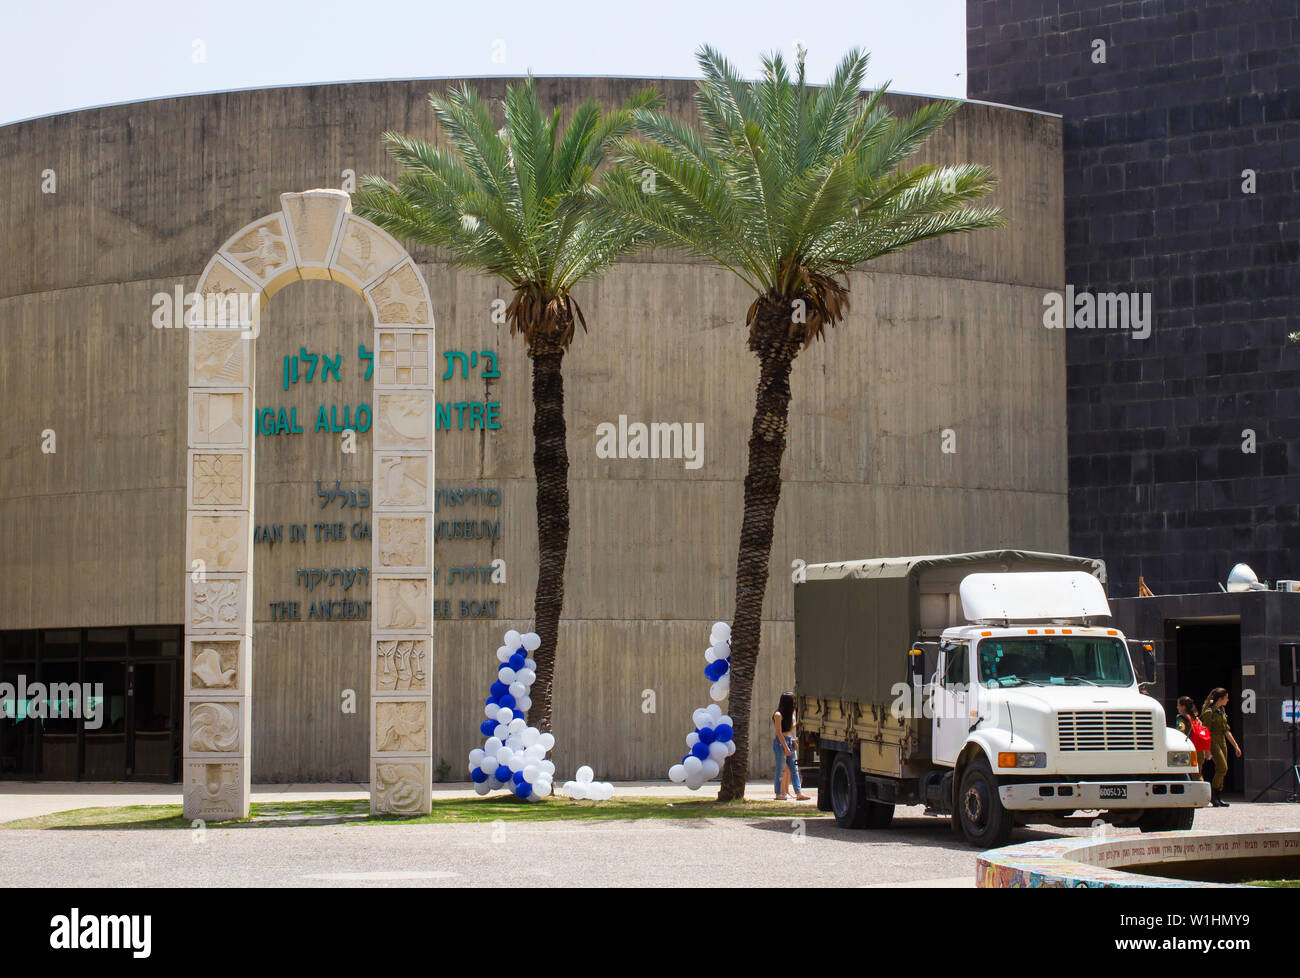 4 June 2019 The impressive architecture of the Yigal Allon Centre on the site of the Ginosar Kibbutz on the shore of the Sea of Galilee in Israel Stock Photo